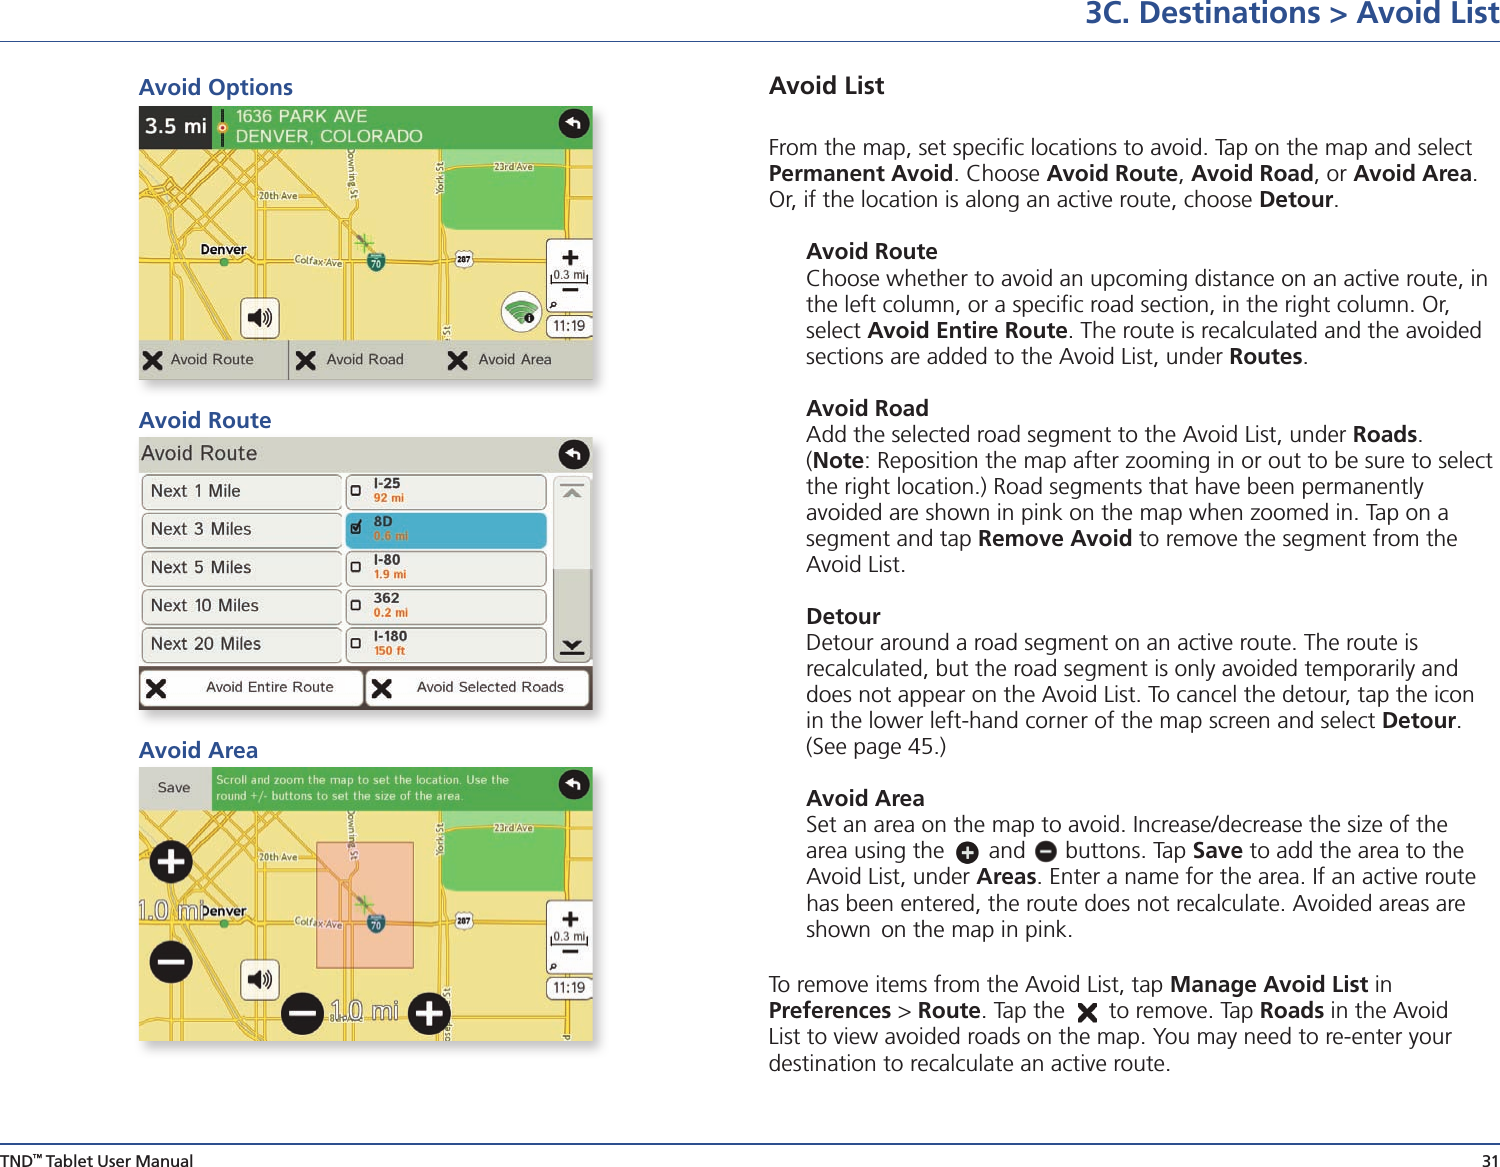 TND™ Tablet User Manual 313C. Destinations &gt; Avoid ListAvoid List From the map, set speciﬁc locations to avoid. Tap on the map and select Permanent Avoid. Choose Avoid Route, Avoid Road, or Avoid Area. Or, if the location is along an active route, choose Detour. Avoid Route  Choose whether to avoid an upcoming distance on an active route, in    the left column, or a speciﬁc road section, in the right column. Or,     select Avoid Entire Route. The route is recalculated and the avoided    sections are added to the Avoid List, under Routes.  Avoid Road  Add the selected road segment to the Avoid List, under Roads.     (Note: Reposition the map after zooming in or out to be sure to select    the right location.) Road segments that have been permanently      avoided are shown in pink on the map when zoomed in. Tap on a    segment and tap Remove Avoid to remove the segment from the    Avoid List. Detour  Detour around a road segment on an active route. The route is          recalculated, but the road segment is only avoided temporarily and    does not appear on the Avoid List. To cancel the detour, tap the icon    in the lower left-hand corner of the map screen and select Detour.    (See page 45.) Avoid Area   Set an area on the map to avoid. Increase/decrease the size of the    area using the   and   buttons. Tap Save to add the area to the    Avoid List, under Areas. Enter a name for the area. If an active route    has been entered, the route does not recalculate. Avoided areas are    shown  on the map in pink.To remove items from the Avoid List, tap Manage Avoid List in          Preferences &gt; Route. Tap the   to remove. Tap Roads in the Avoid List to view avoided roads on the map. You may need to re-enter your        destination to recalculate an active route.Avoid OptionsAvoid RouteAvoid Area